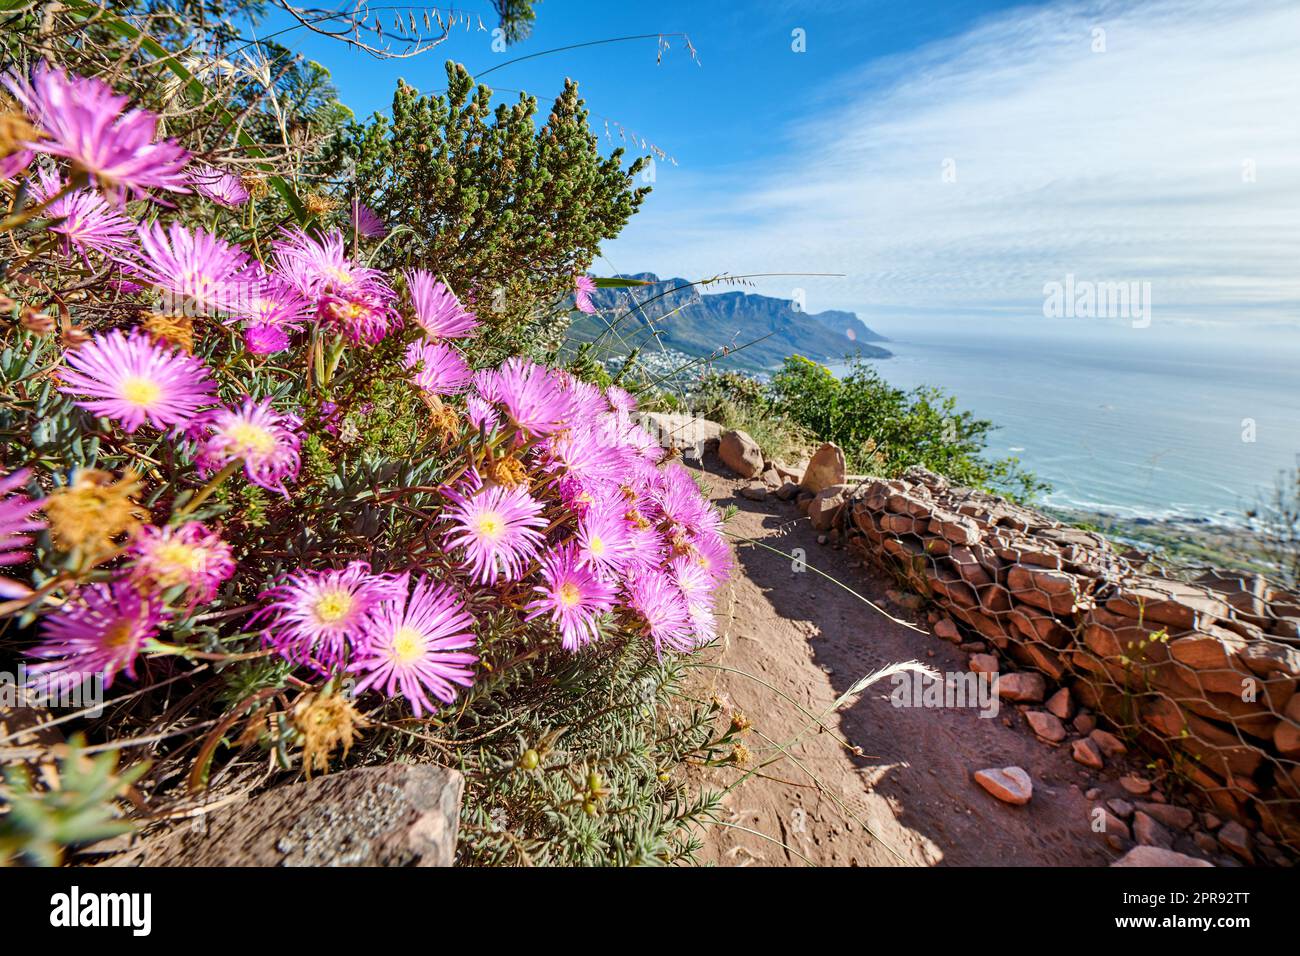 Pink flowers growing on a mountain with rugged hiking trail and blue sky background by the sea. Colorful flora in the carpobrotus edulis or ice plant species blooming in nature Stock Photo